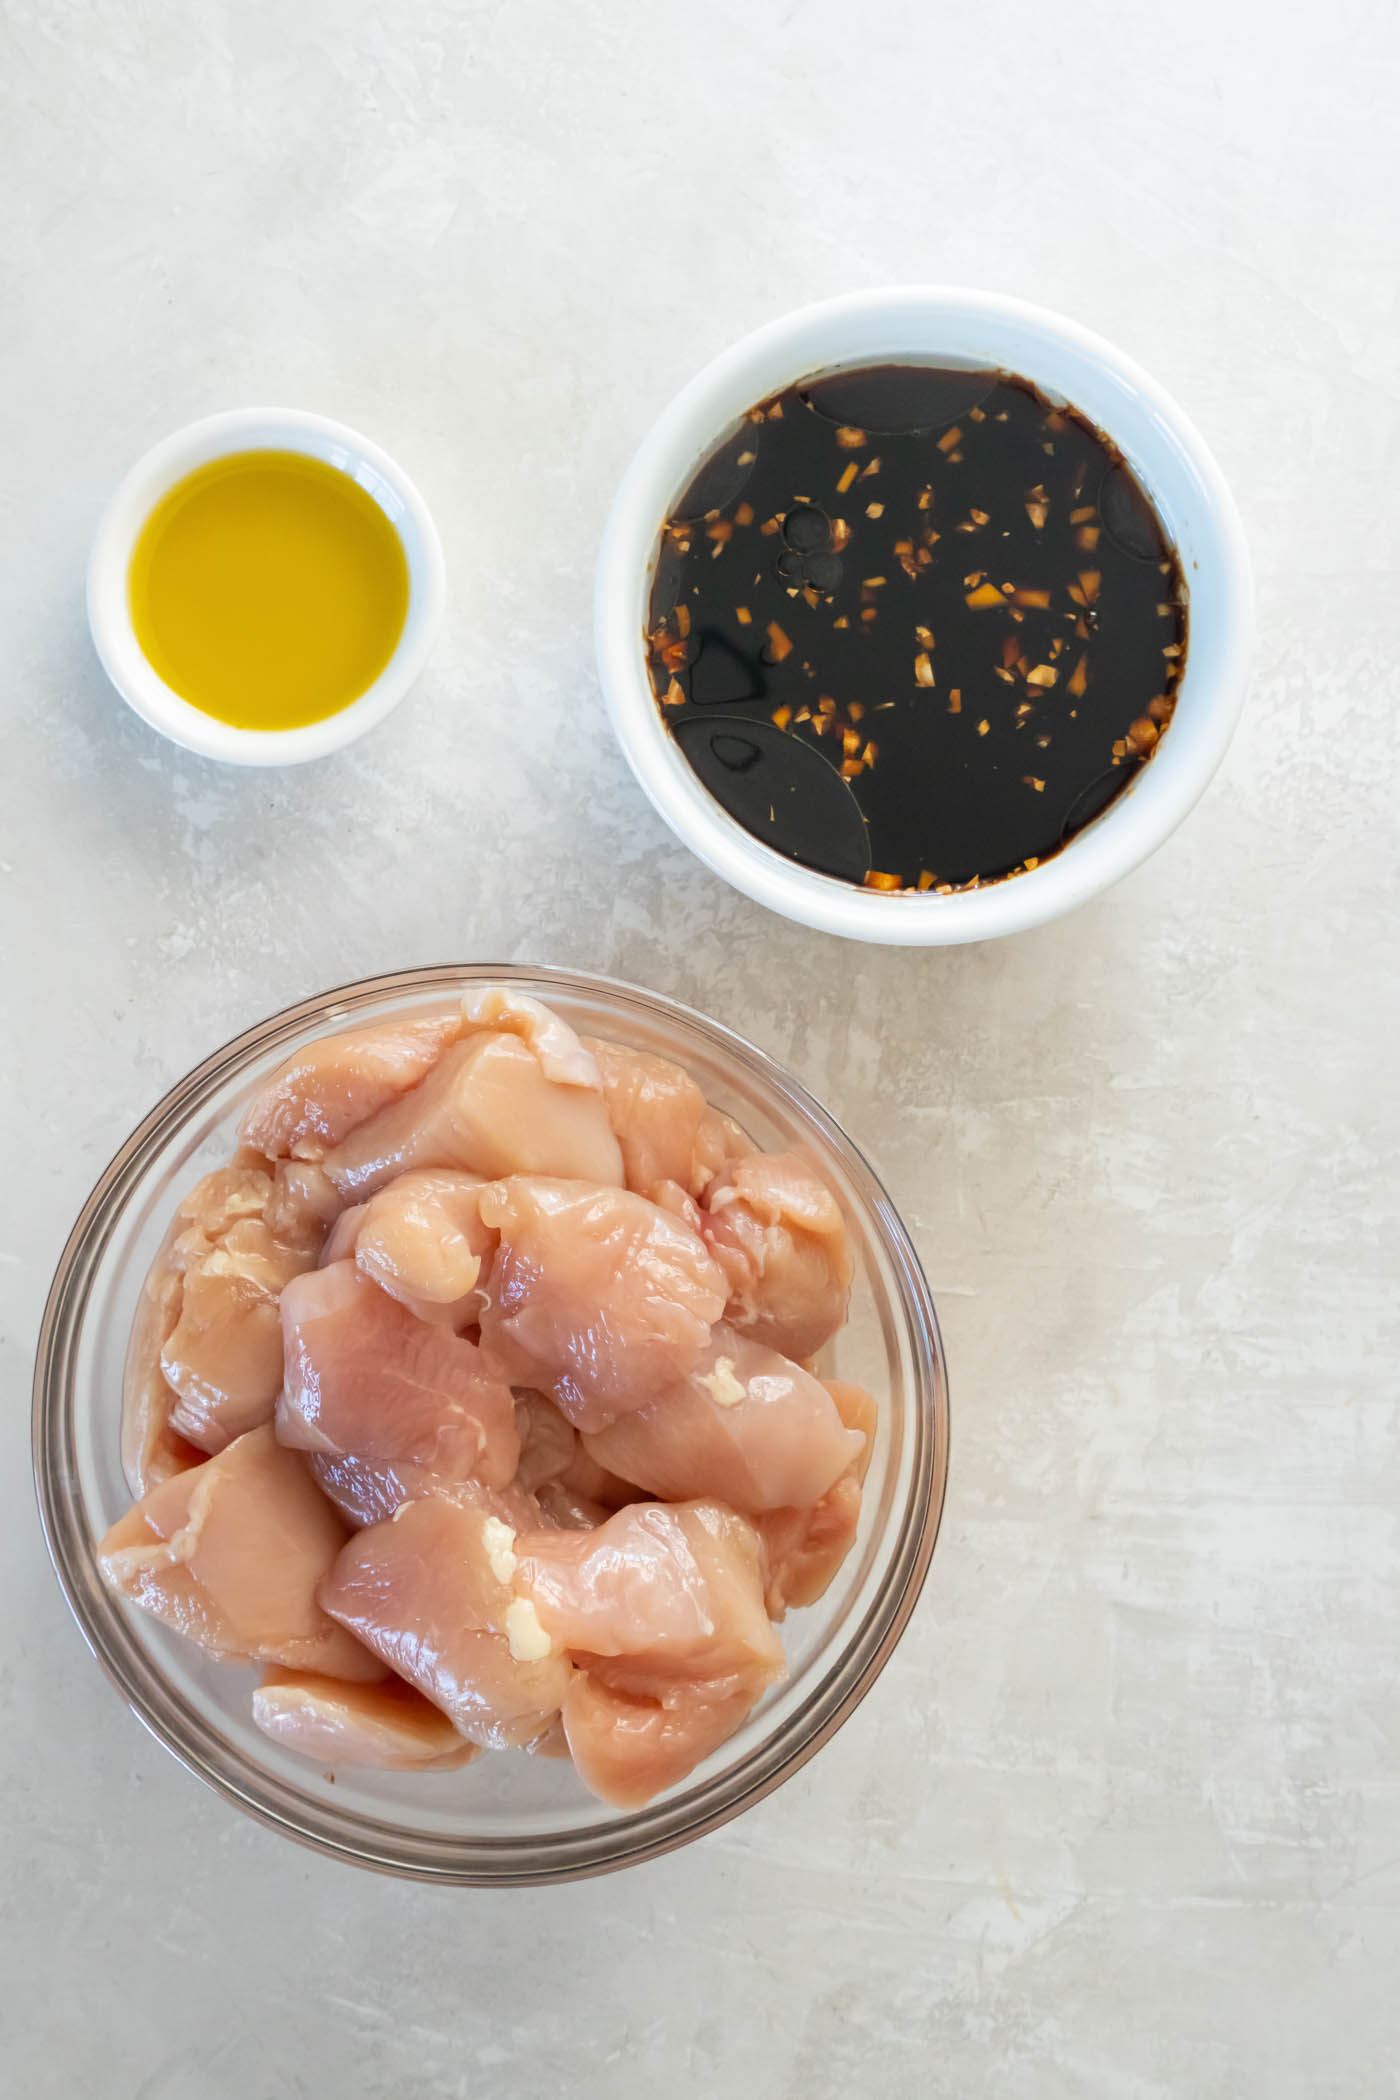 Teriyaki sauce ingredients combined in a bowl with dish of oil and bowl of chopped chicken next to it.